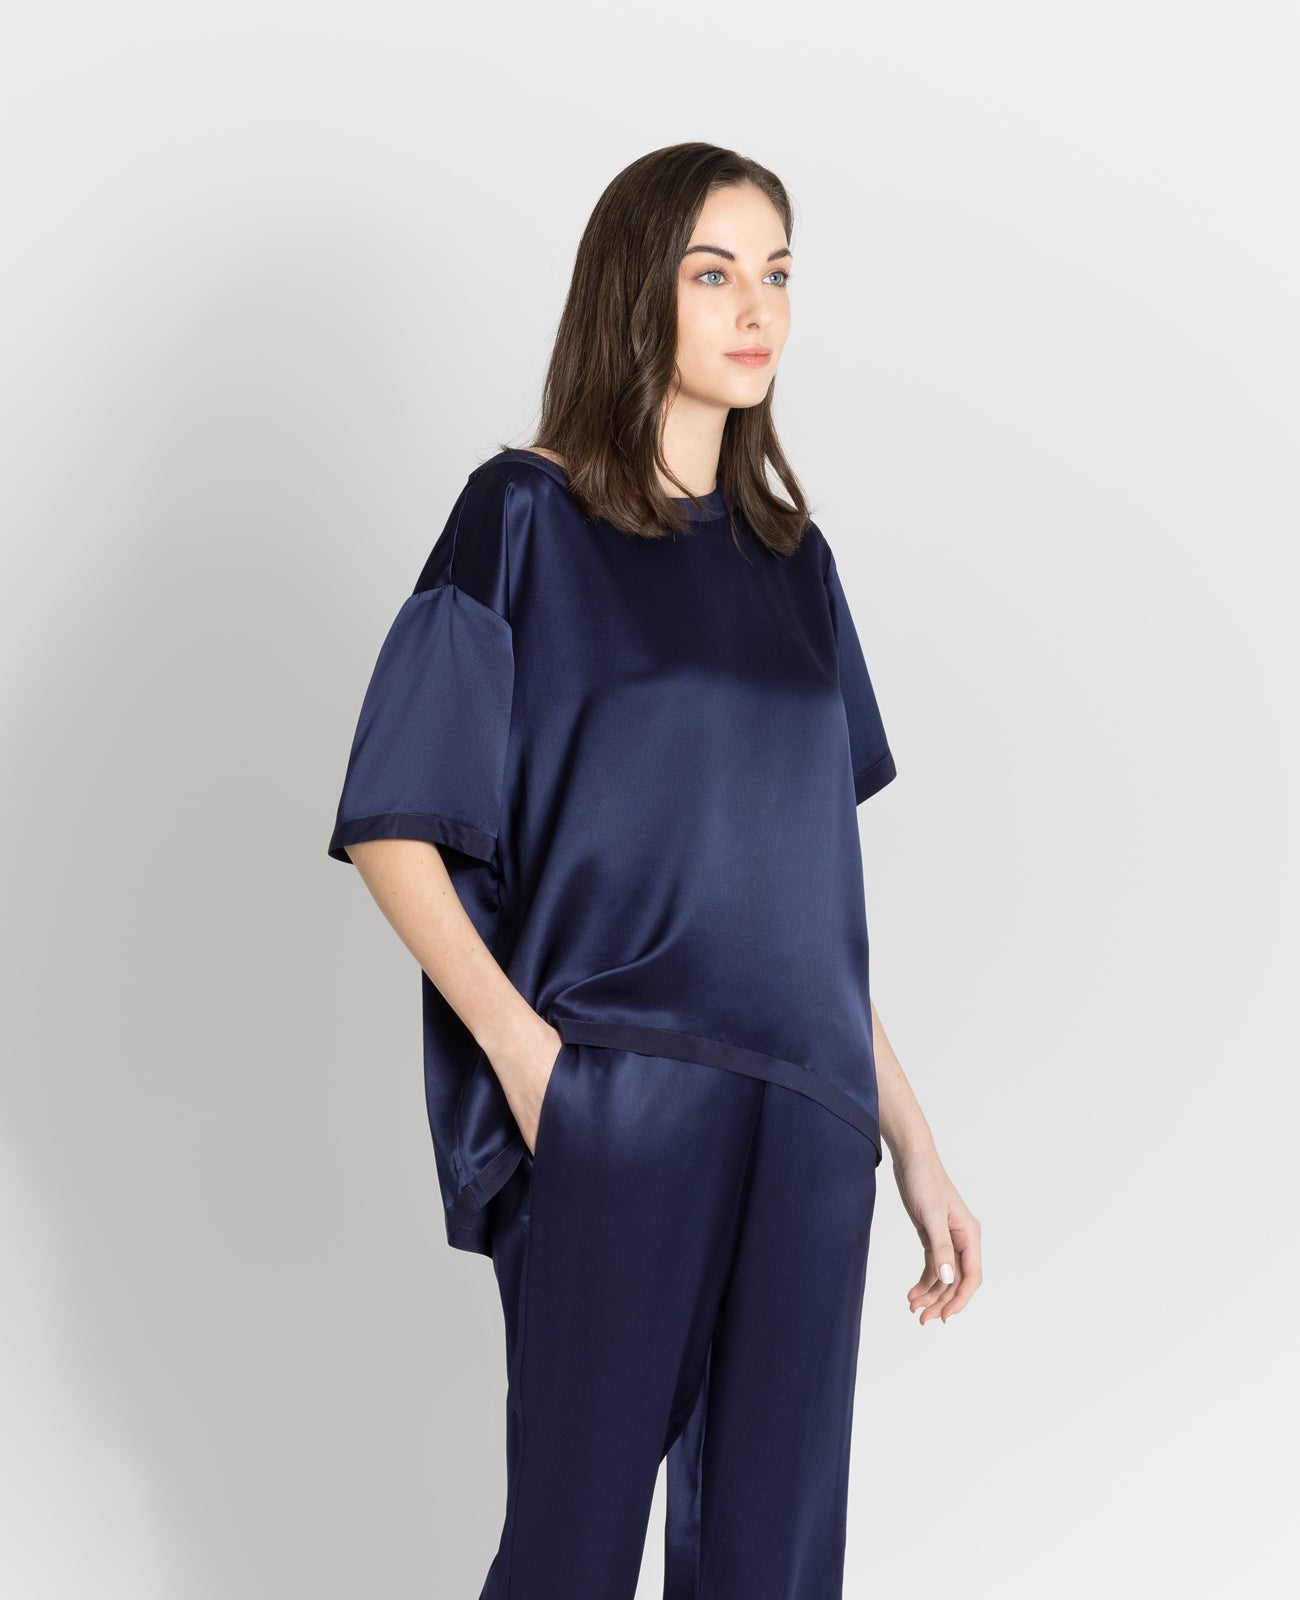 Elegant Monochromatic Outfit: Grana Chinese Silk Pants and Silk/Cashmere Tee